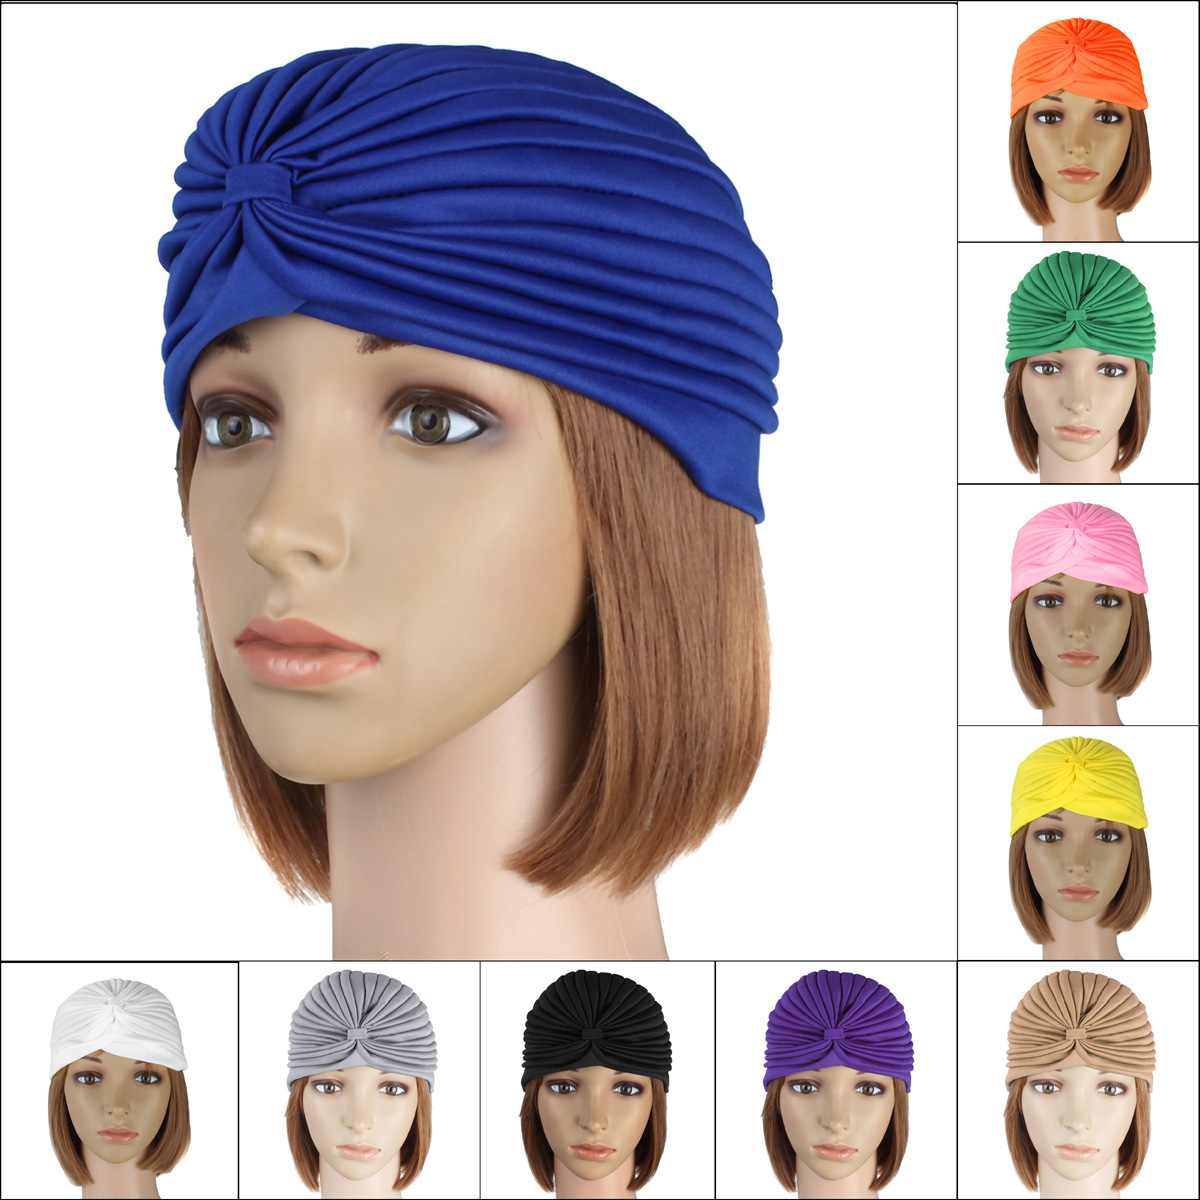 

Delivery Mummy Puerperal Turban Chemo Costume Full Head Cover Wrap Hats Cap Hair Head Loss Scarf Warm Bandana